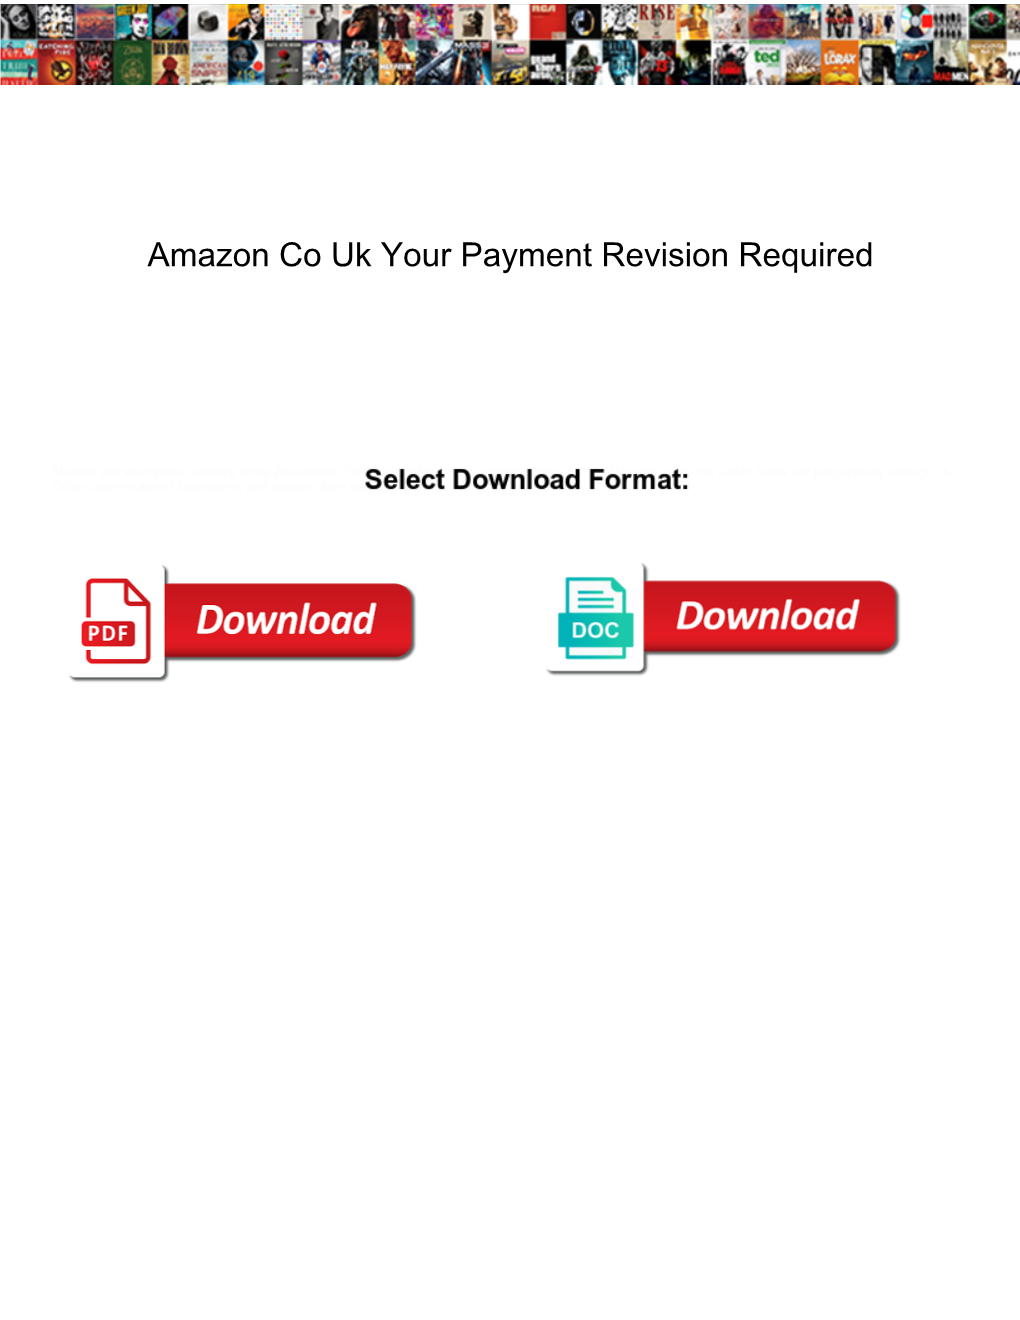 Amazon Co Uk Your Payment Revision Required